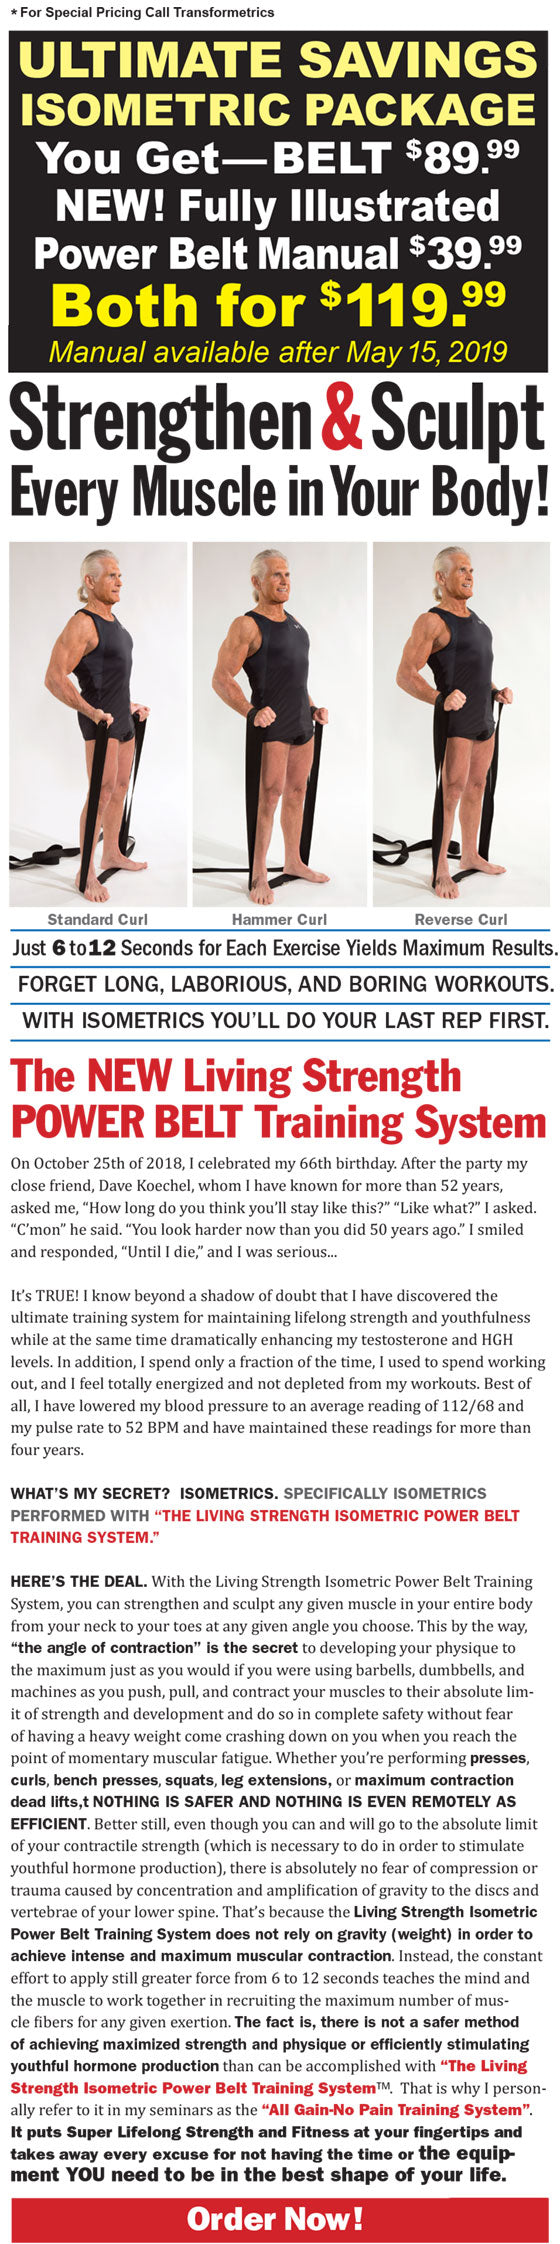 HERE IT IS - THE ISOMETRIC POWER BELT! Belt_7c81abae-9cf7-430a-a952-ab108d11dbef